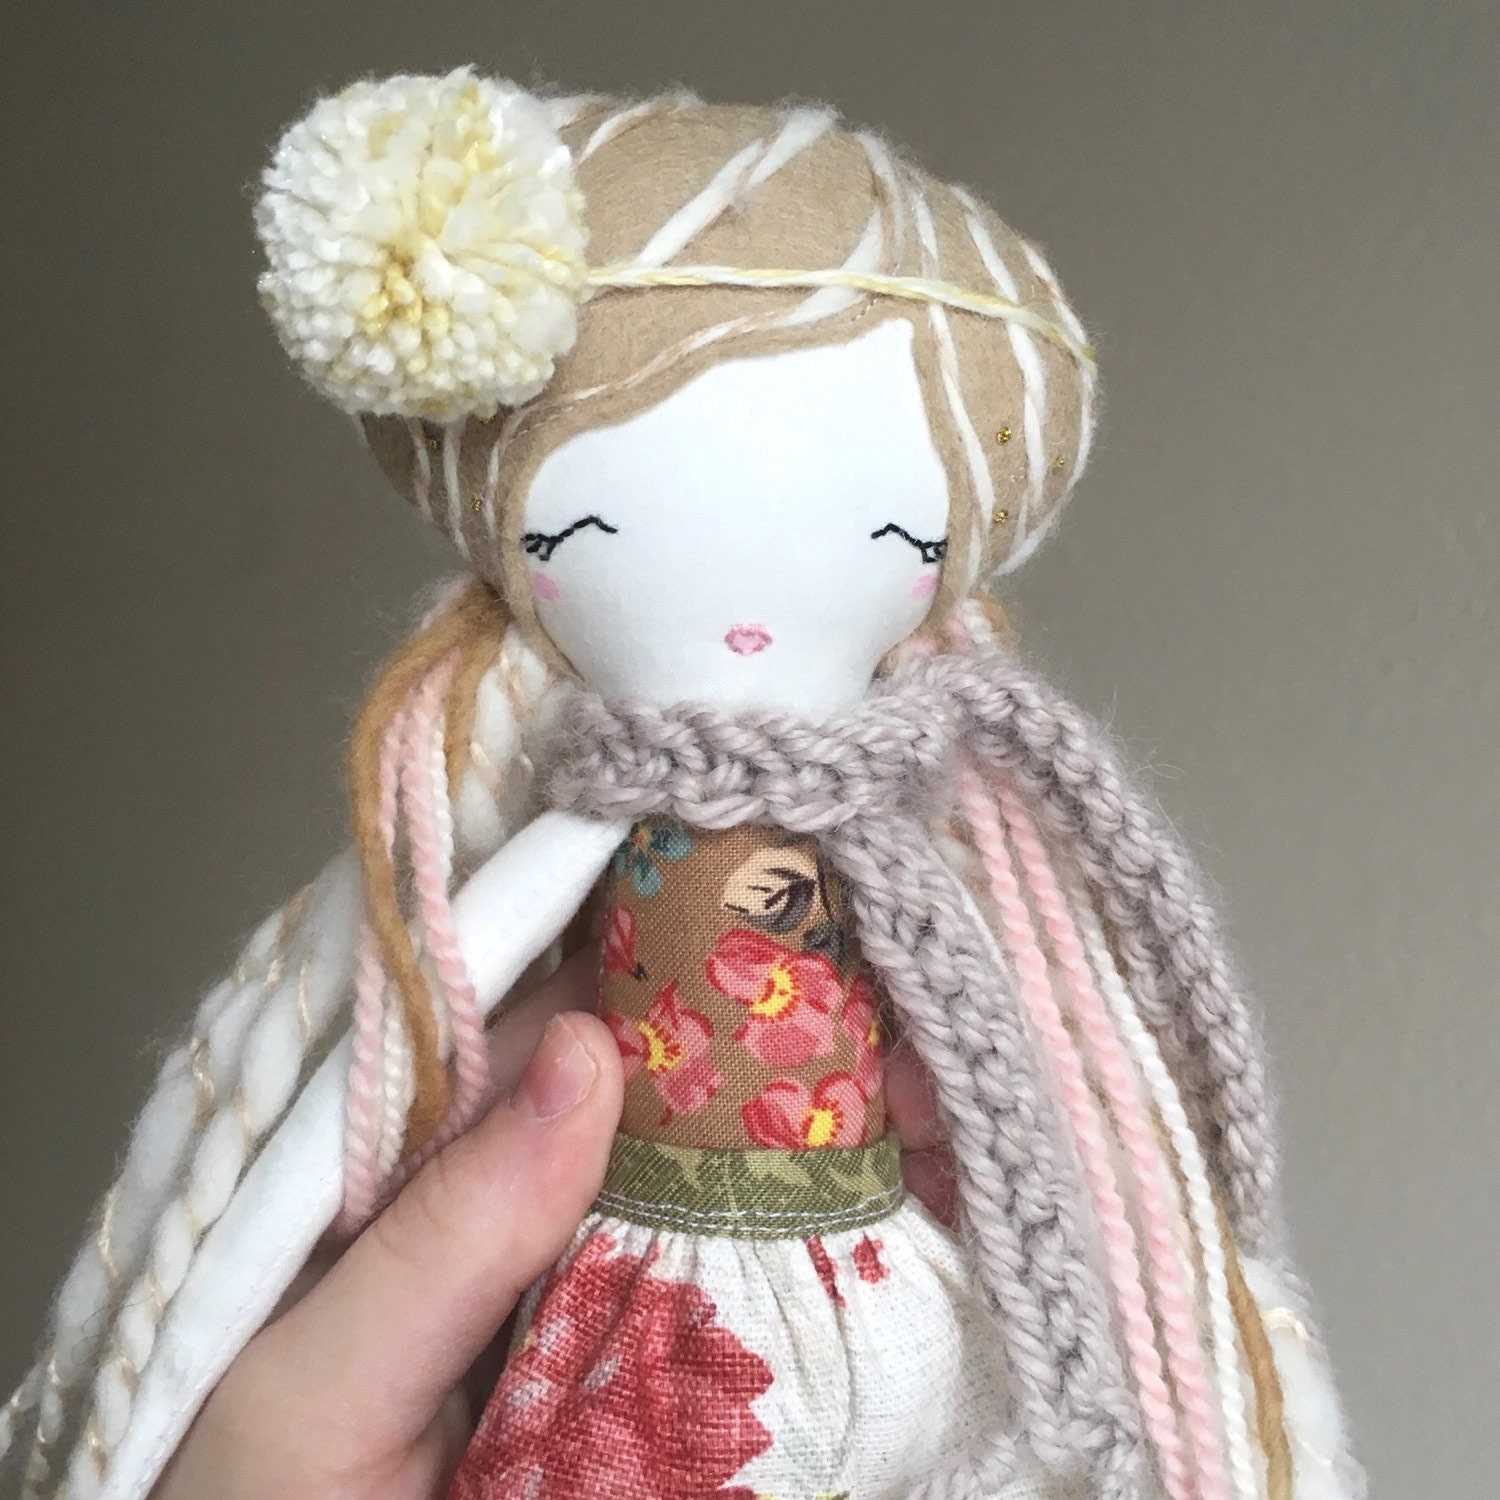 Heirloom Cloth Doll 10.25 ish Dress up Doll with